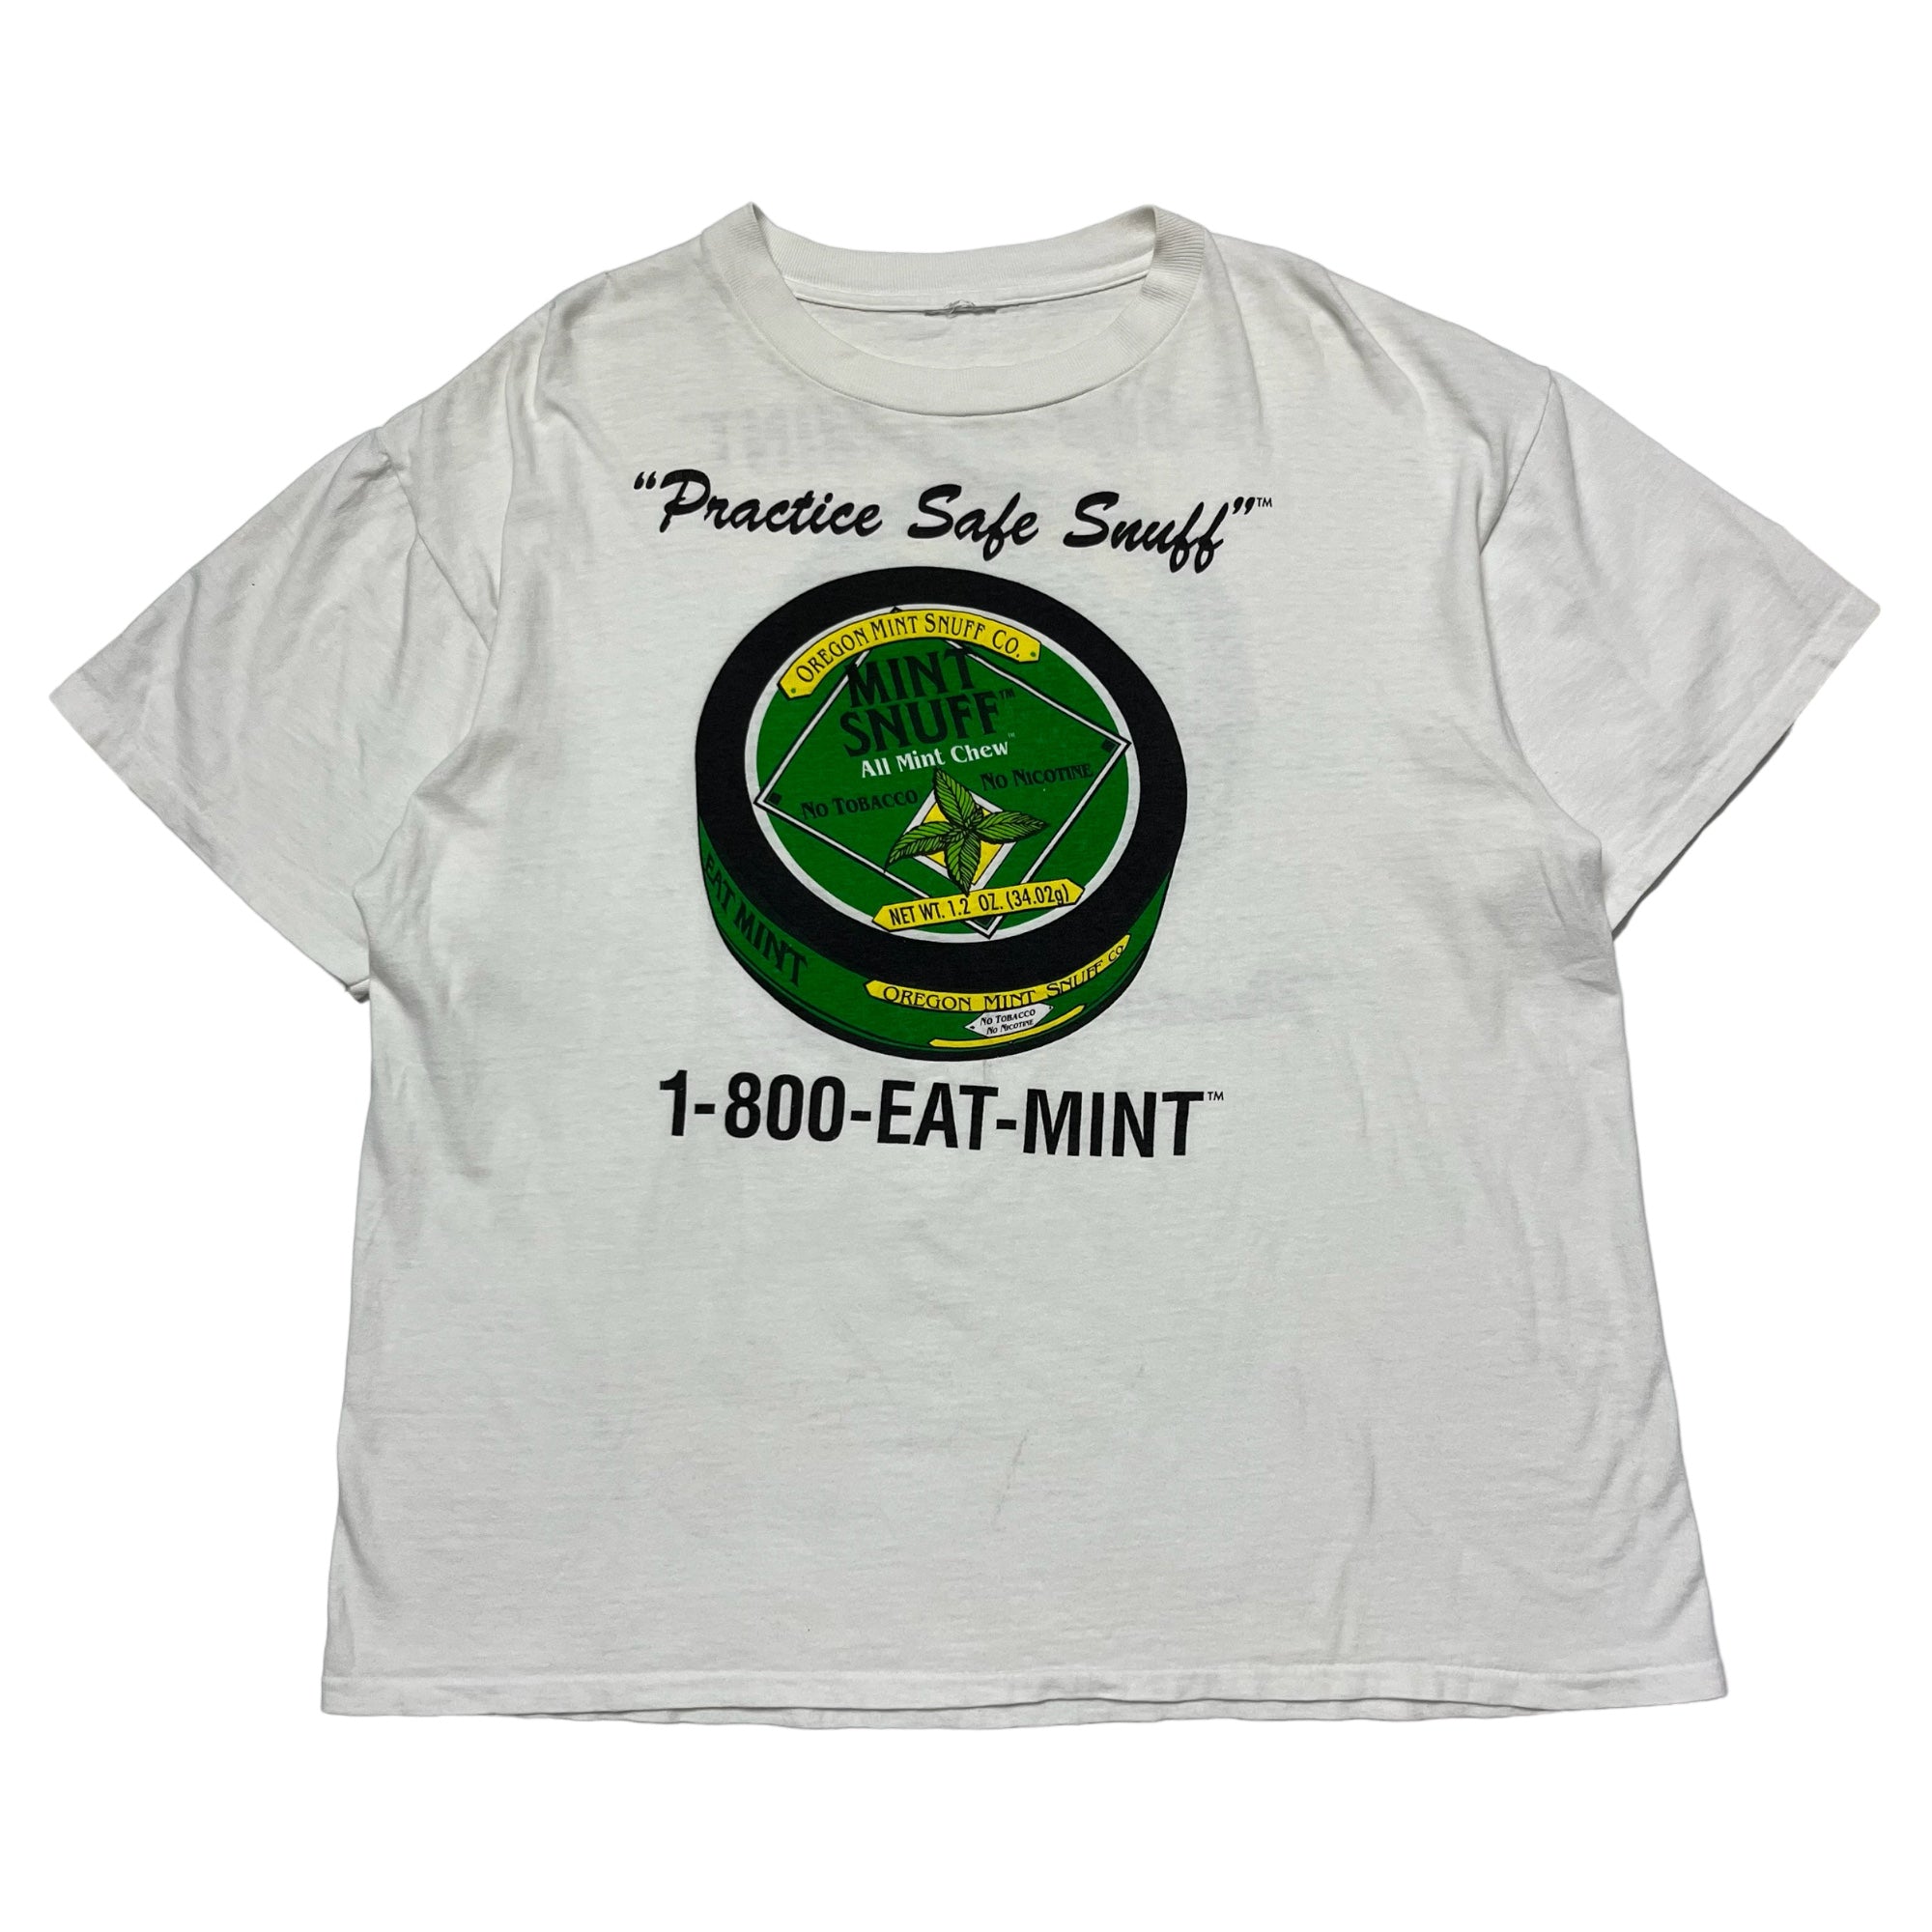 ‘90s Mint Snuff ‘Practice Safe Snuff’ T-Shirt - White - XL